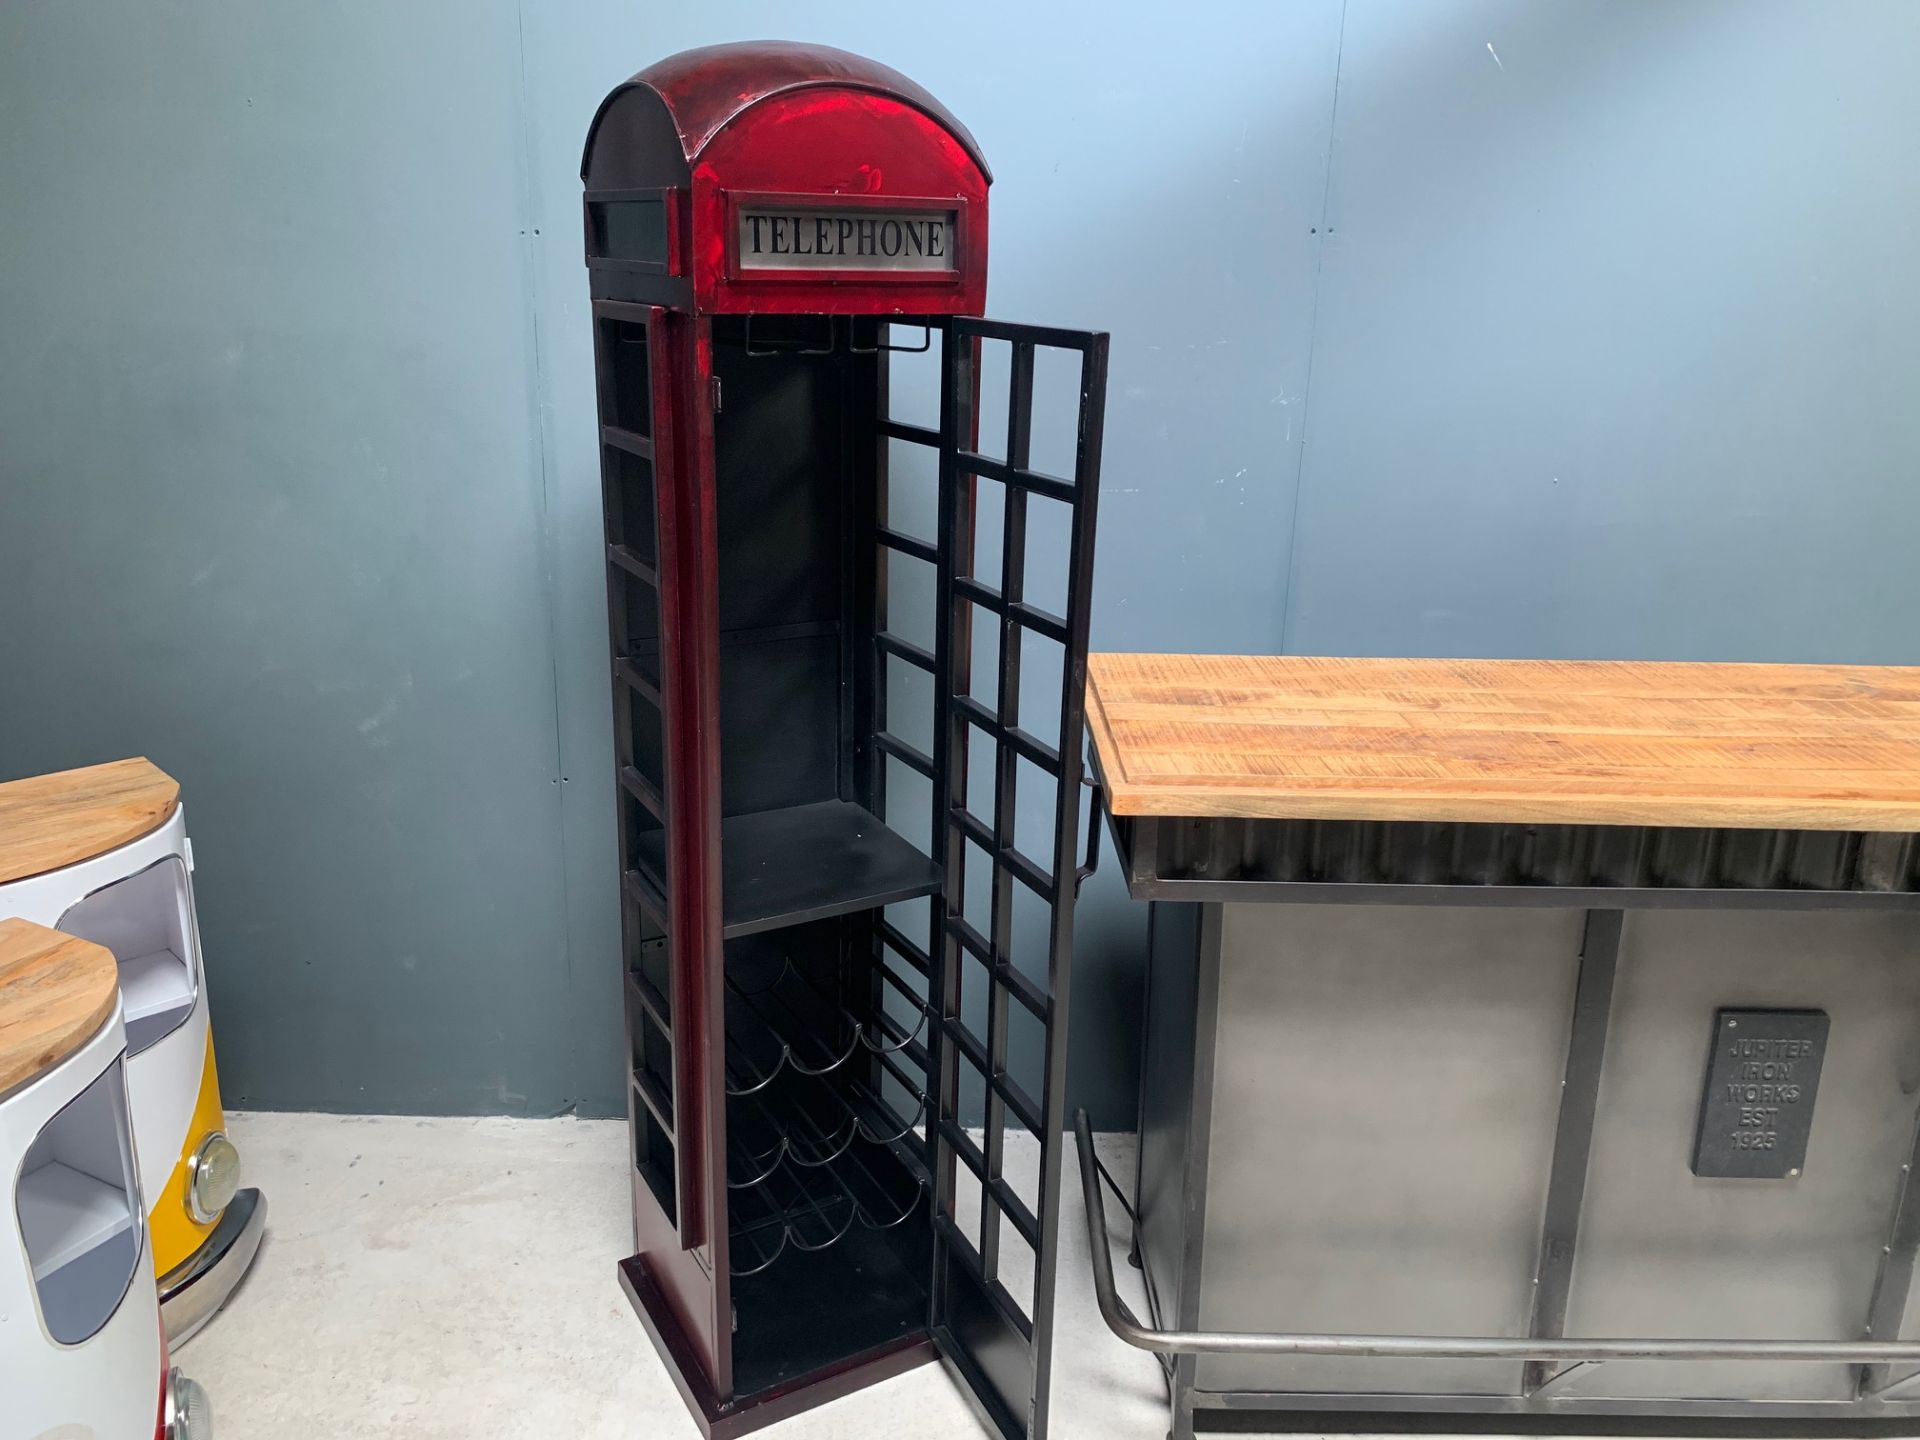 BOXED TALL ICONIC LONDON TELEPHONE BOX, BAR CABINET WITH WINE RACK AND GLASS RACK IN FABRICATED - Image 2 of 5